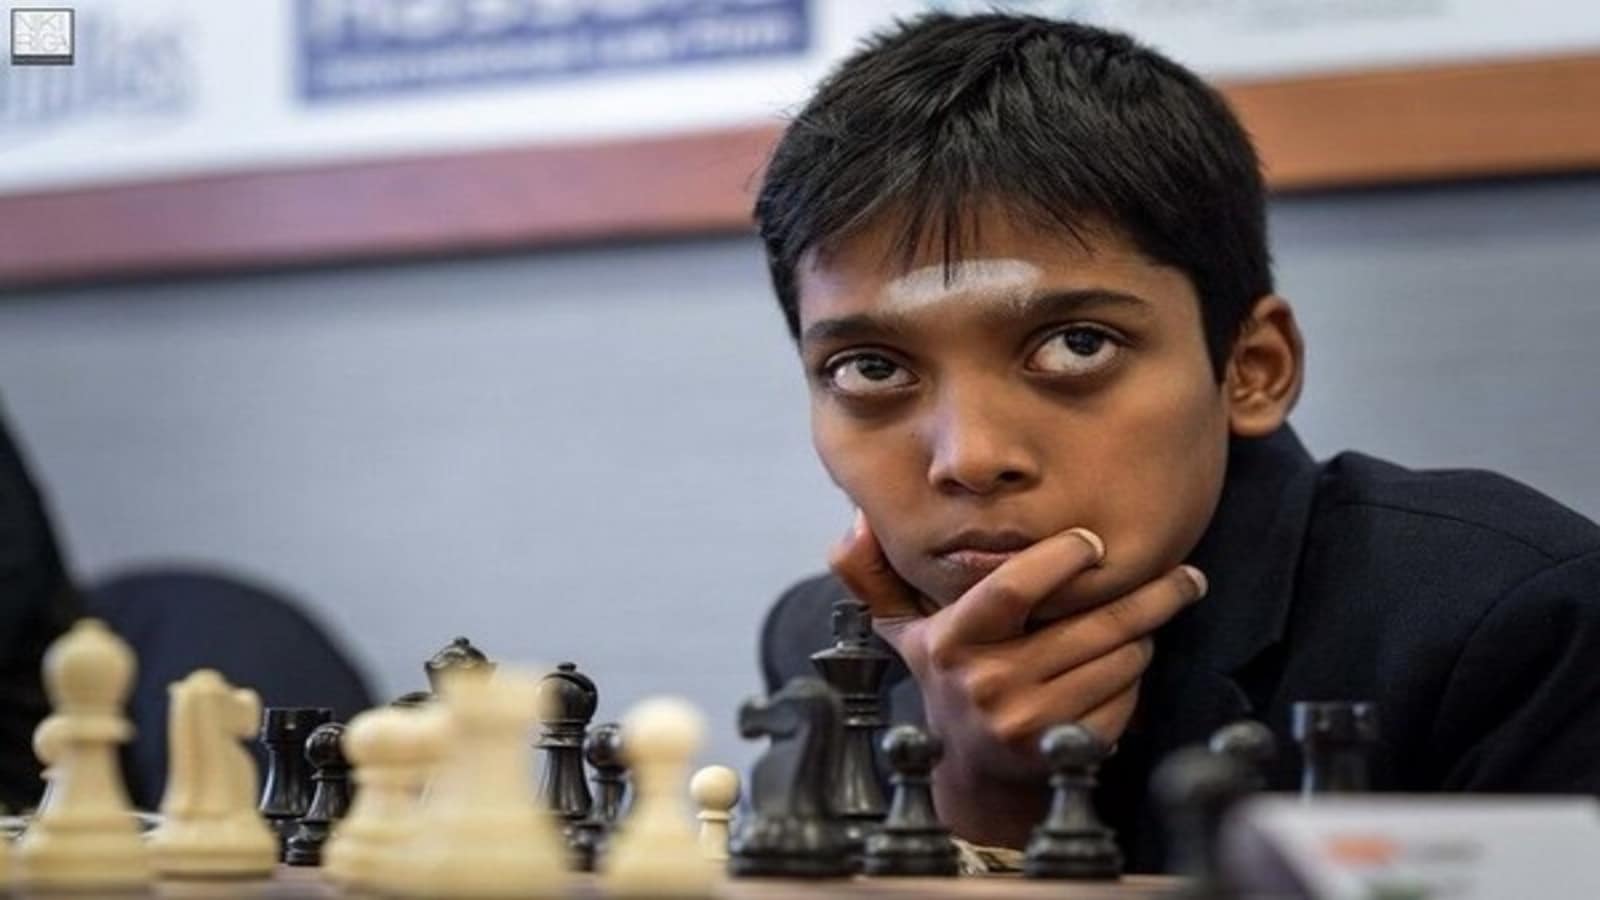 I Was Getting Goosebumps': Praggnanandhaa's Sister Thanks India For  Celebrating Chess Prodigy's Heroics (WATCH)